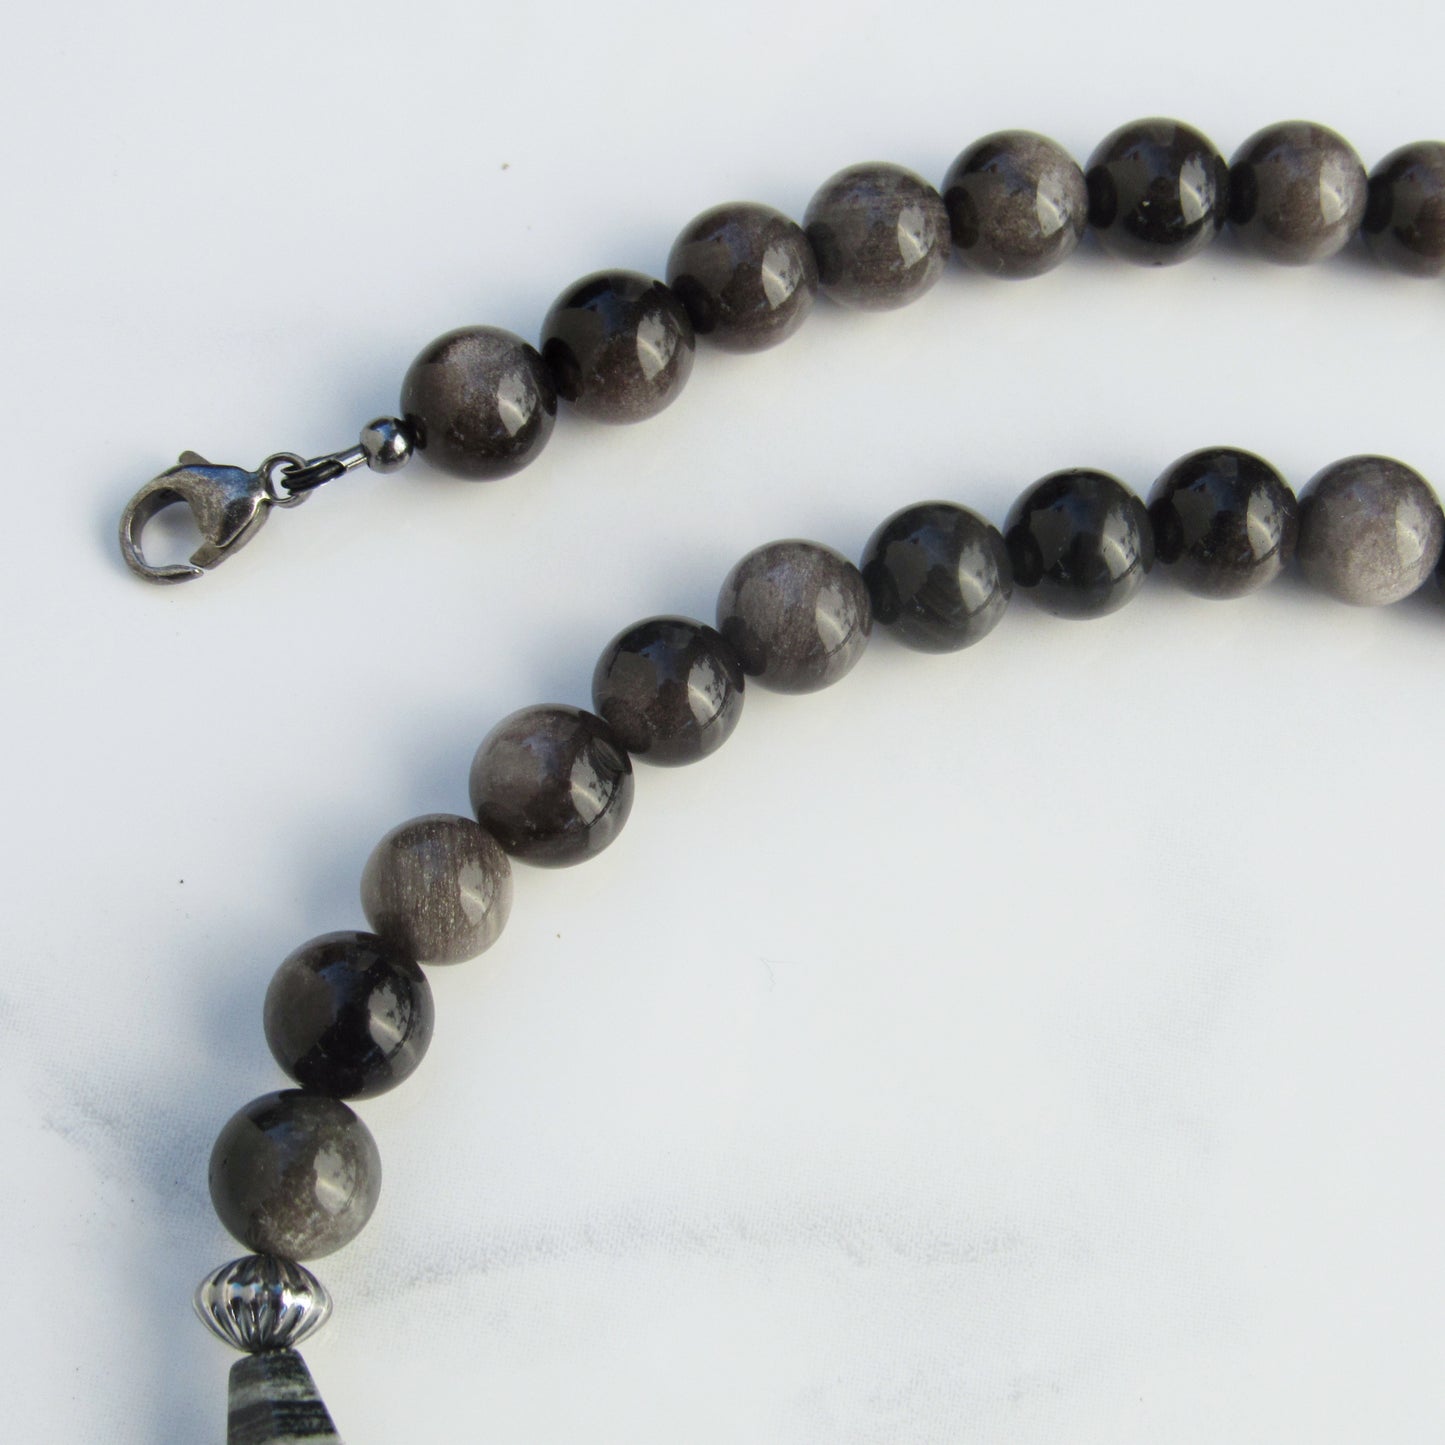 Cloudy Quartz, silver leaf Jasper and silver obsidian with oxidized s silver men’s handmade necklace